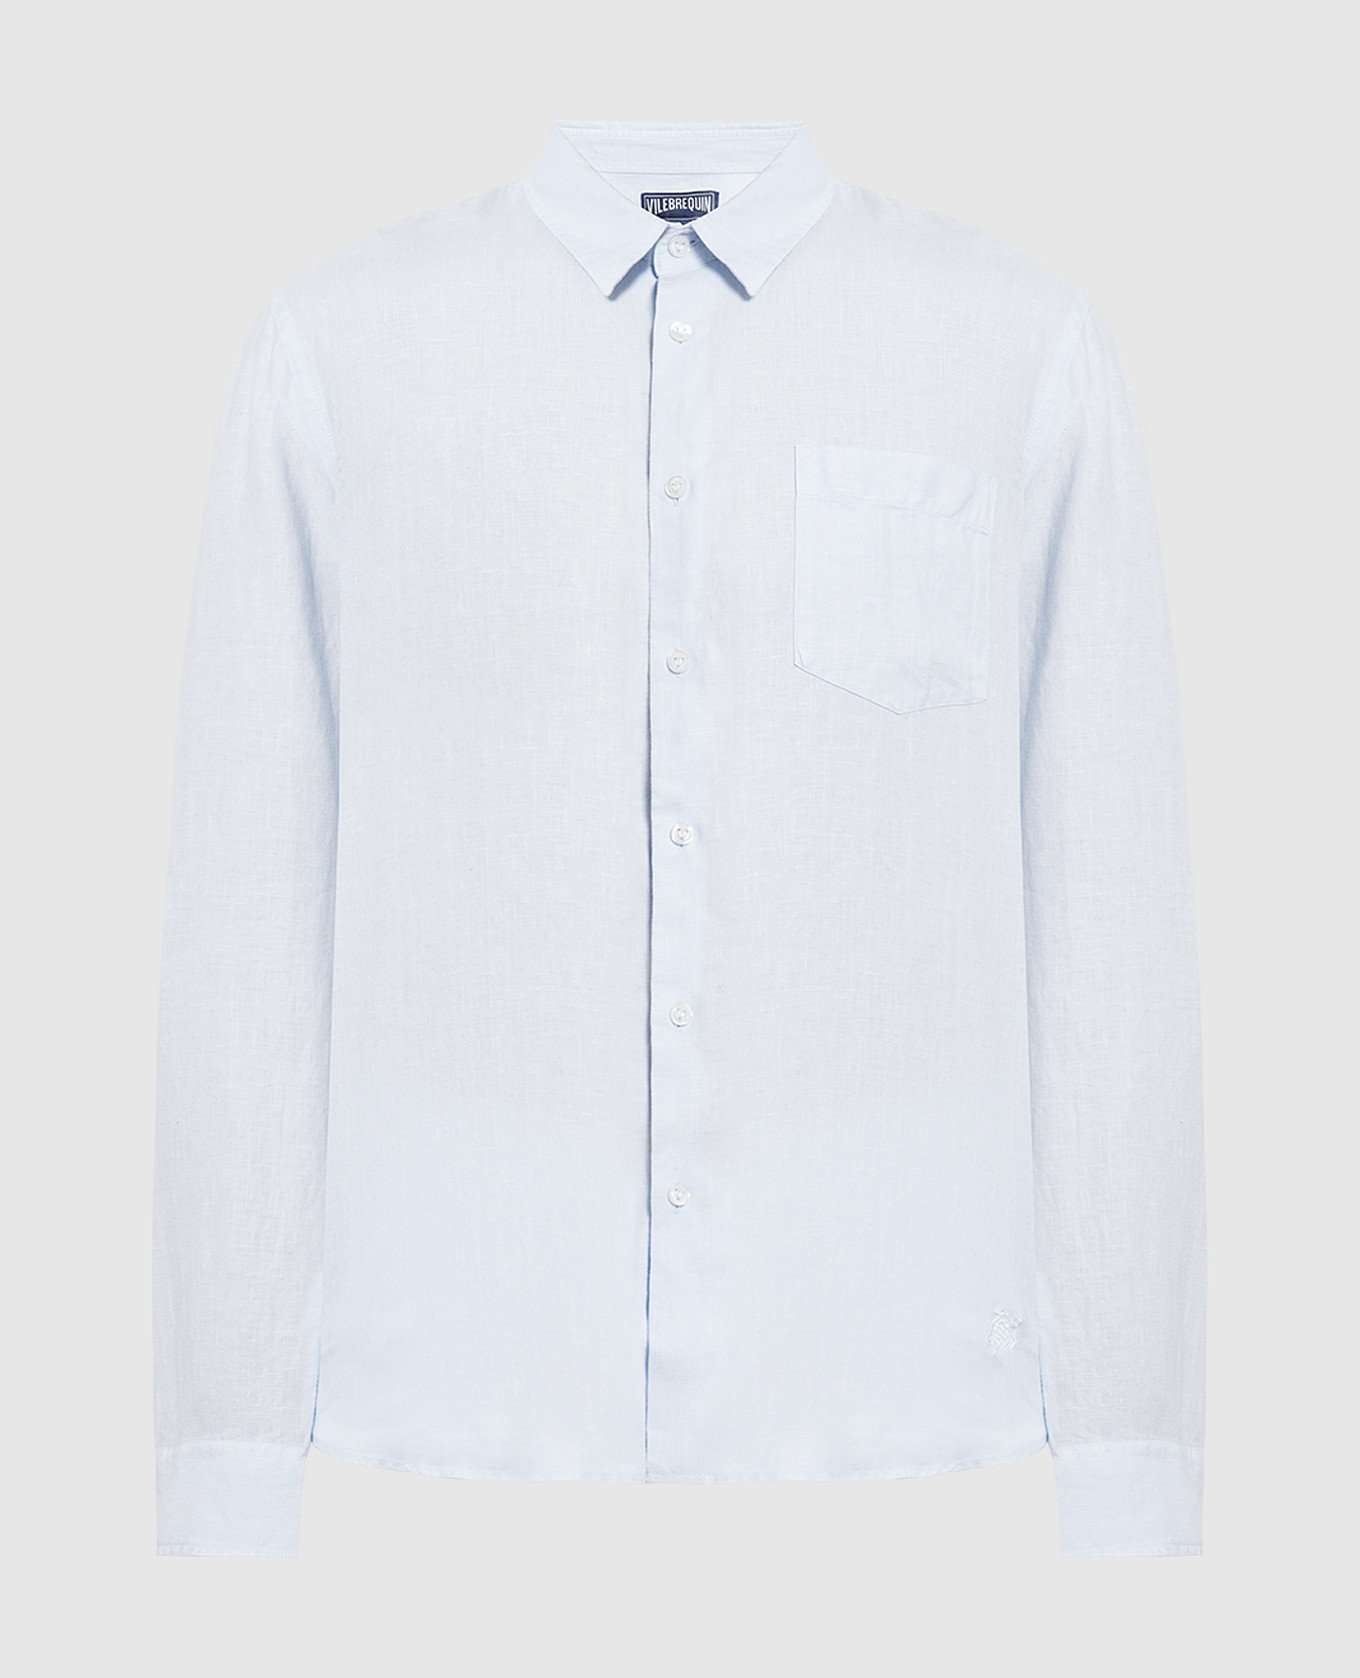 Caroubis blue linen shirt with logo embroidery